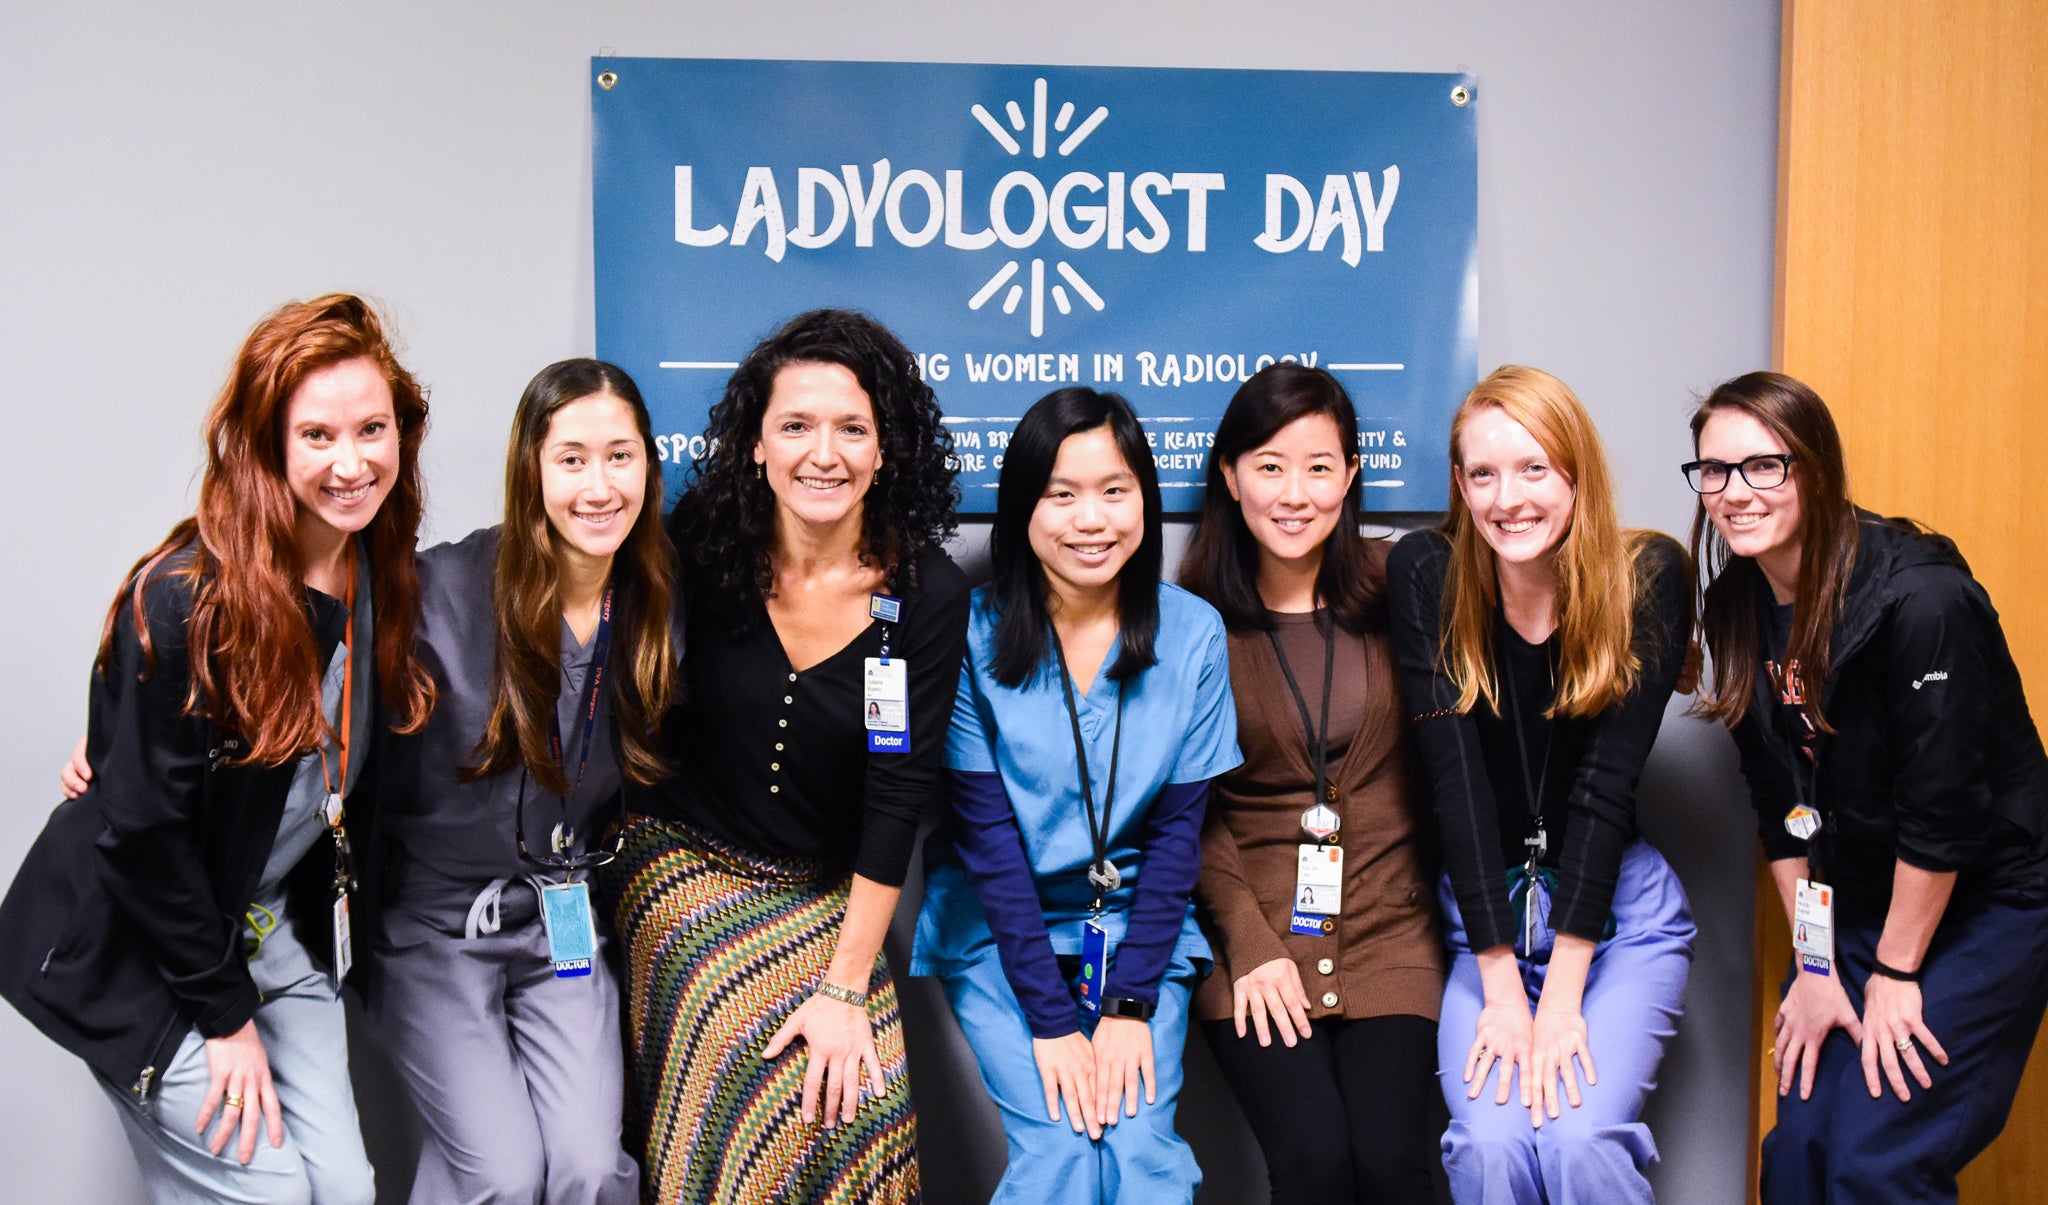 A special UVA Radiology initiative, the 'Ladyologist' program provides a space for female and non-binary radiologists to share and learn from one another